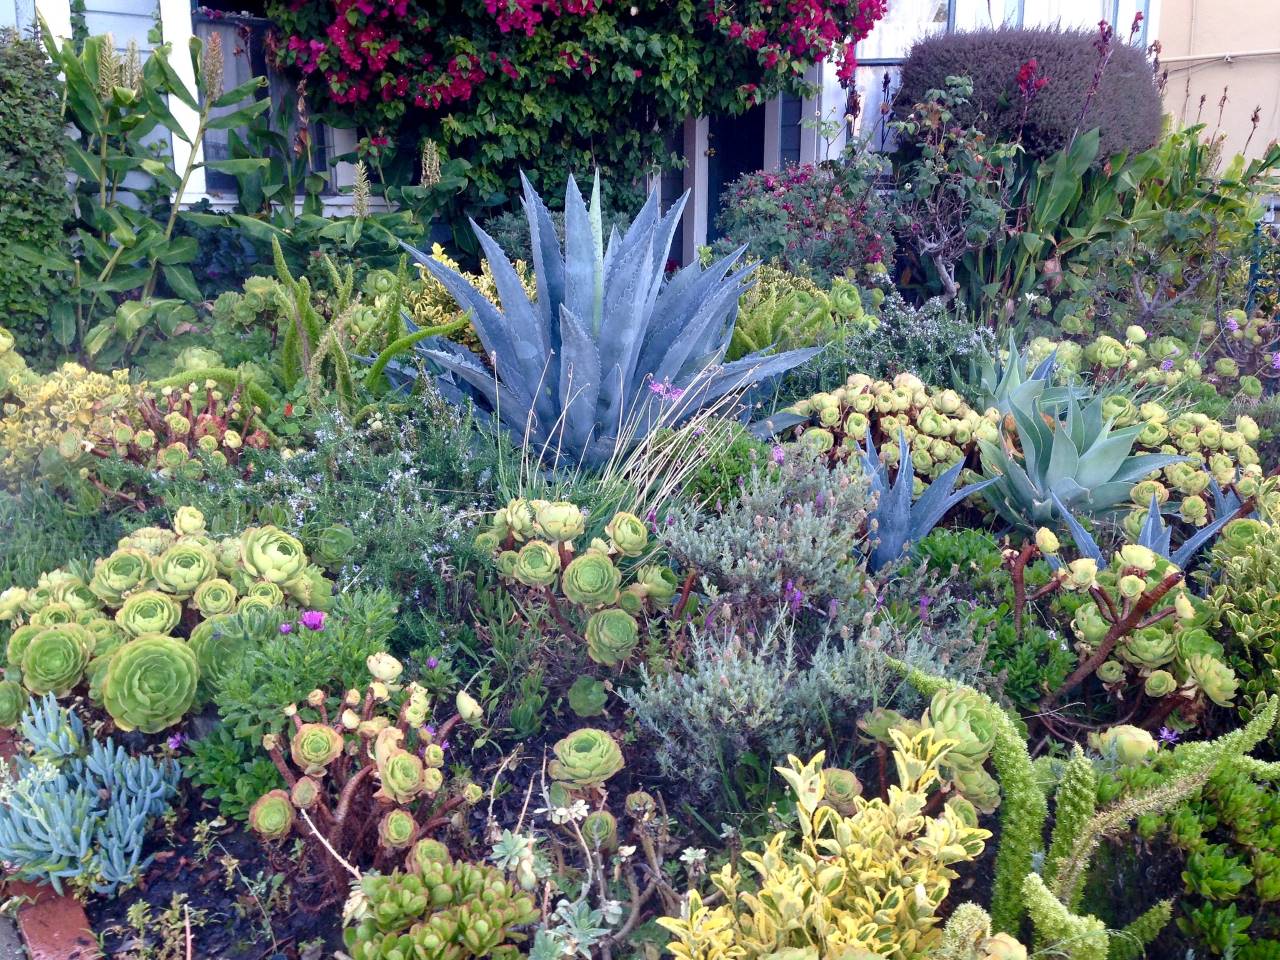 Photo of an example of low-water xeriscaping using a wide variety of colorful succulents in Berkeley, California.